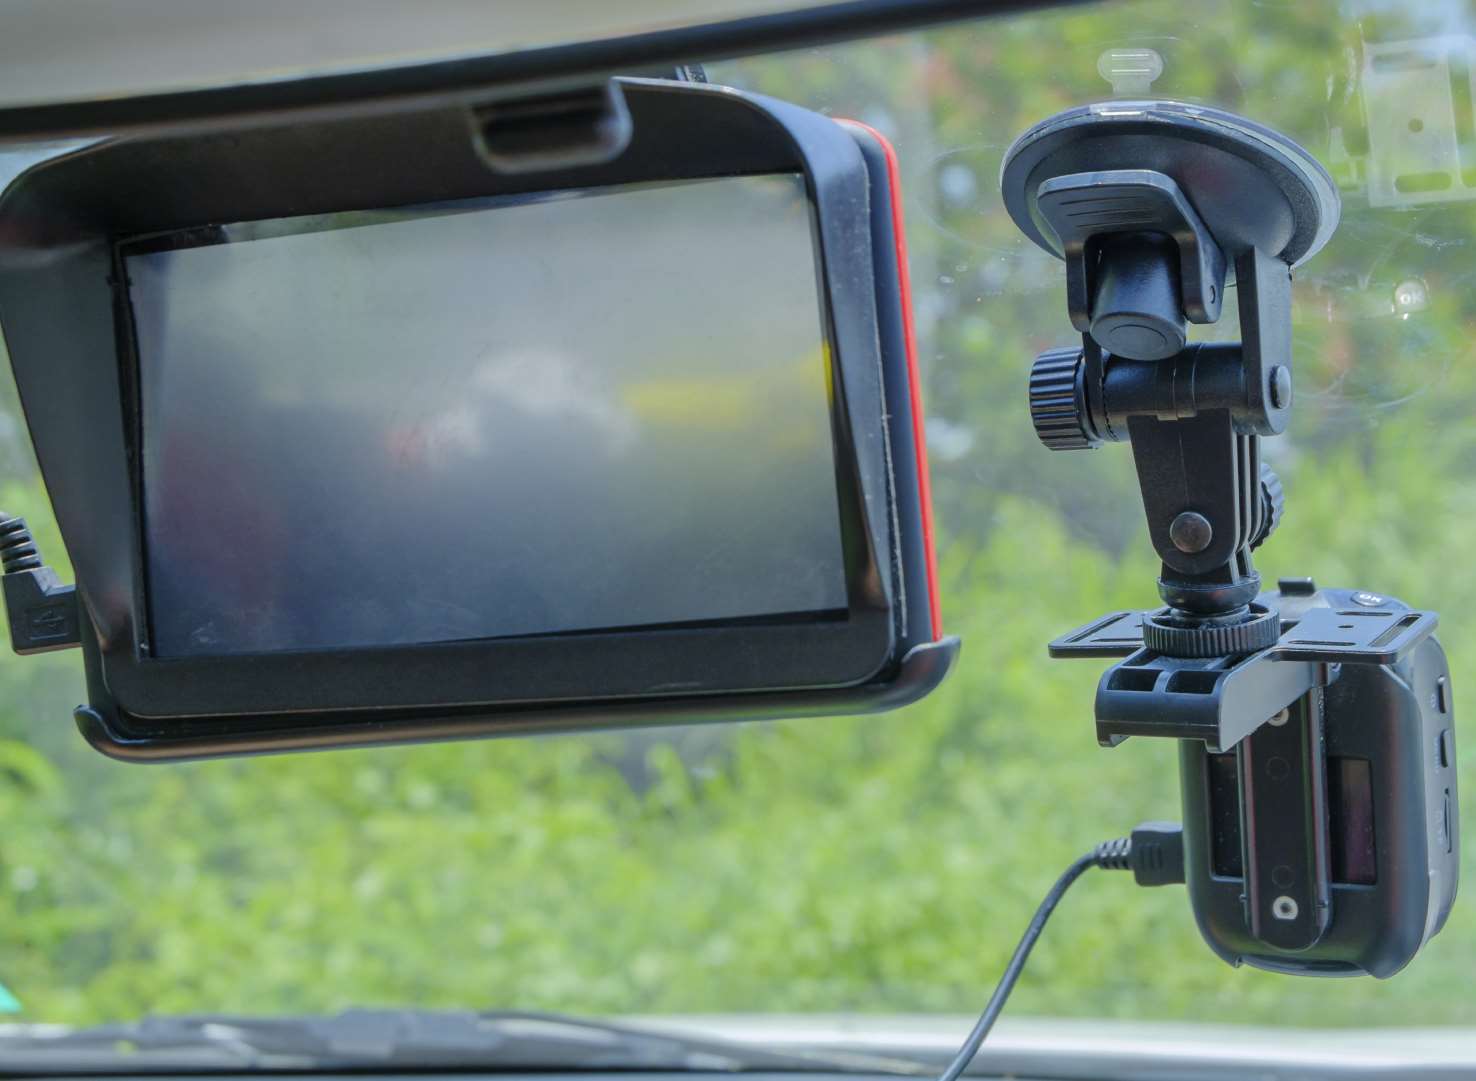 Ryder was filmed on his own dashcam. Stock image